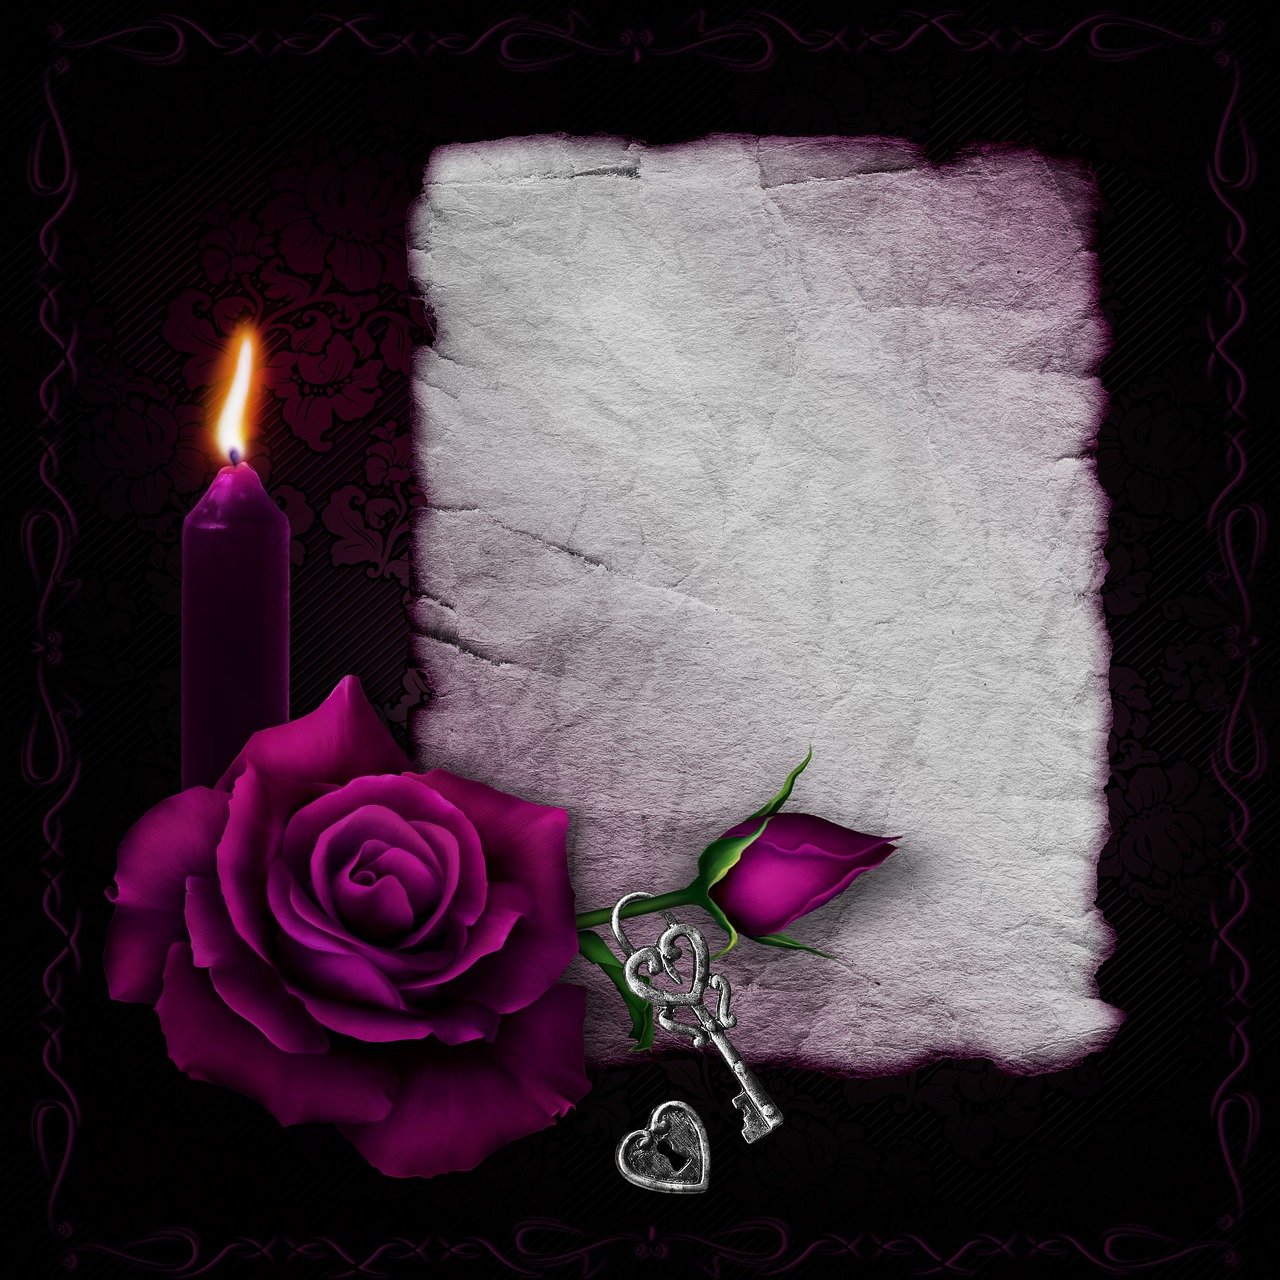 a purple rose sitting next to a purple candle, a photo, gothic art, textured parchment background, on a dark rock background, mirror background, dark atmosphere illustration